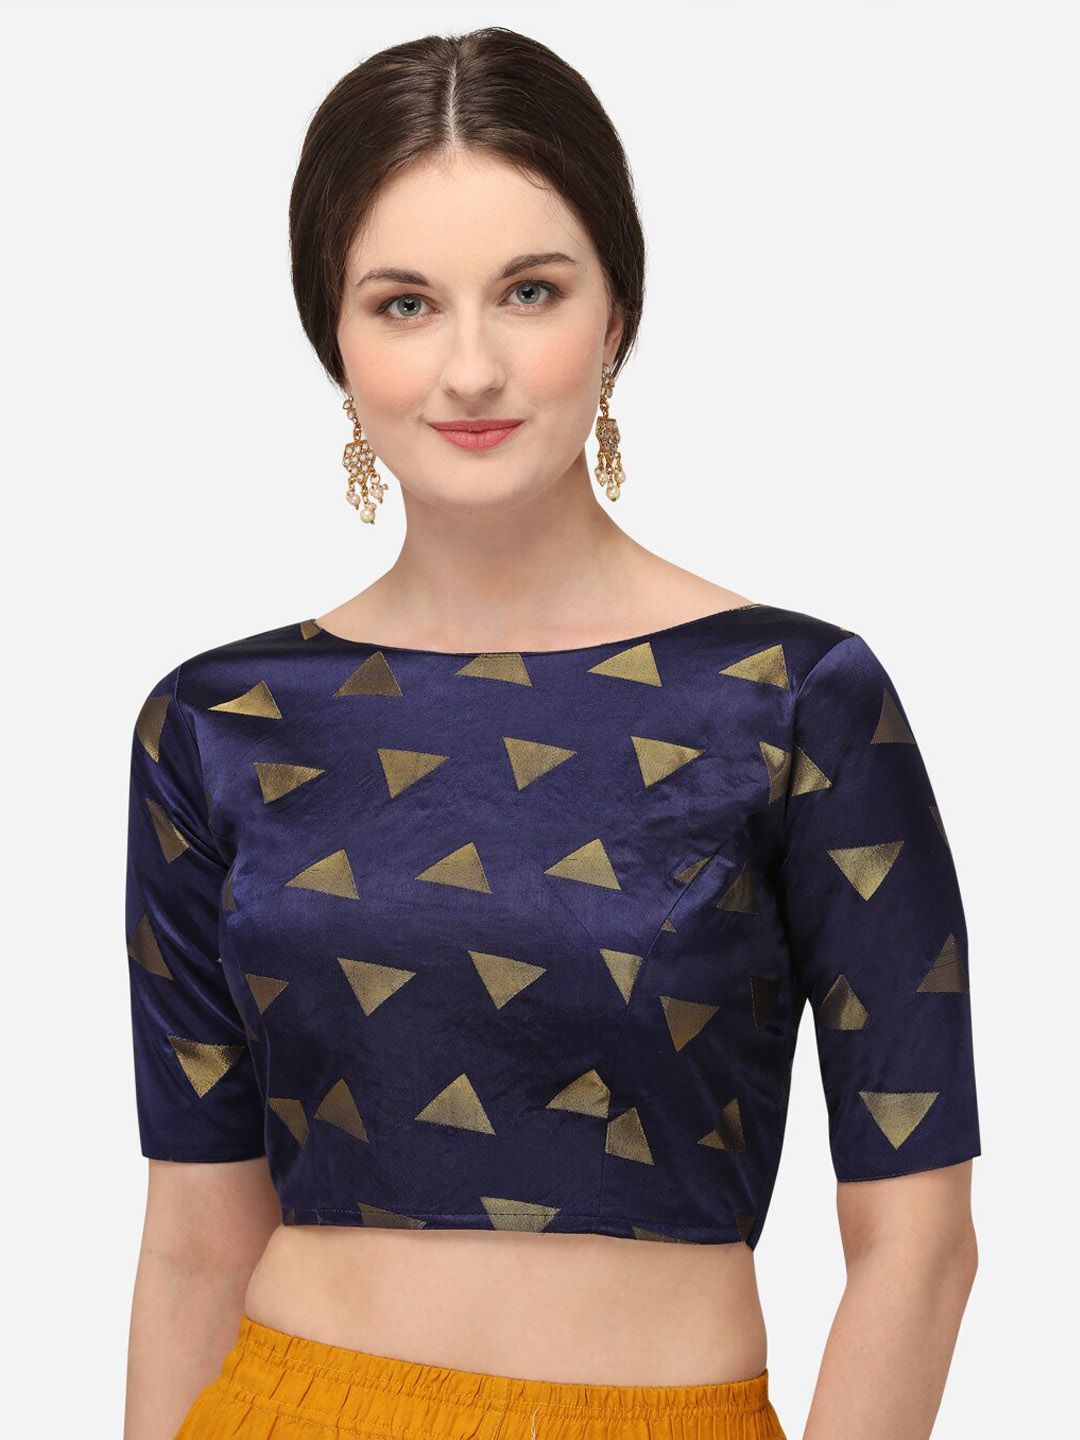 Fab Viva Navy Blue & Gold-Coloured Printed Saree Blouse Price in India